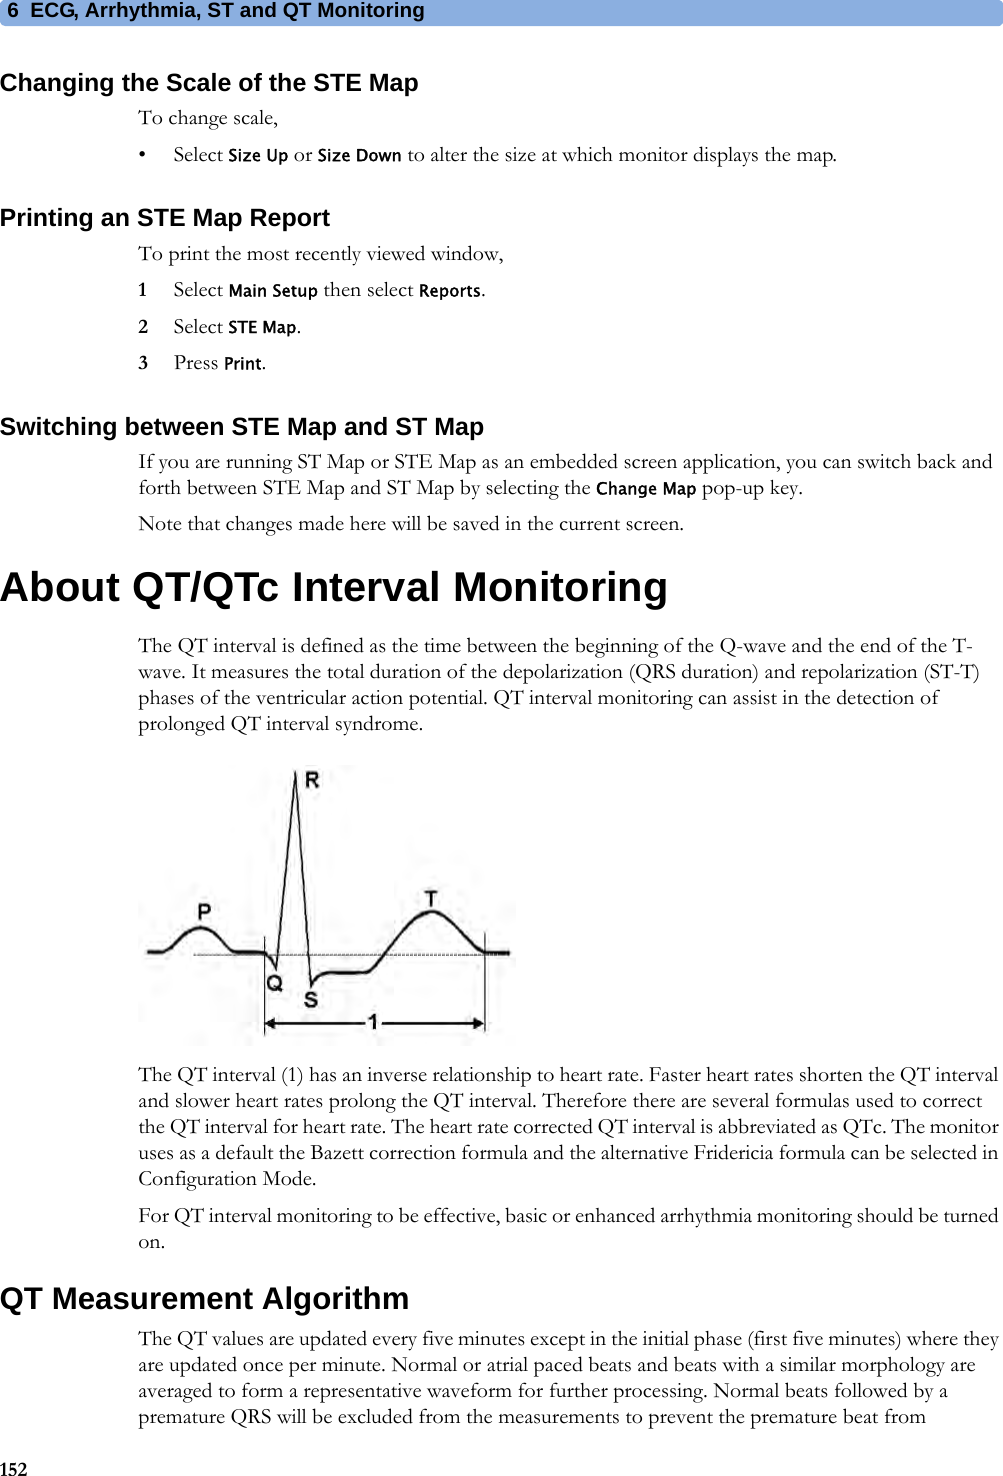 6 ECG, Arrhythmia, ST and QT Monitoring152Changing the Scale of the STE MapTo change scale,•Select Size Up or Size Down to alter the size at which monitor displays the map.Printing an STE Map ReportTo print the most recently viewed window,1Select Main Setup then select Reports.2Select STE Map.3Press Print.Switching between STE Map and ST MapIf you are running ST Map or STE Map as an embedded screen application, you can switch back and forth between STE Map and ST Map by selecting the Change Map pop-up key.Note that changes made here will be saved in the current screen.About QT/QTc Interval MonitoringThe QT interval is defined as the time between the beginning of the Q-wave and the end of the T-wave. It measures the total duration of the depolarization (QRS duration) and repolarization (ST-T) phases of the ventricular action potential. QT interval monitoring can assist in the detection of prolonged QT interval syndrome.The QT interval (1) has an inverse relationship to heart rate. Faster heart rates shorten the QT interval and slower heart rates prolong the QT interval. Therefore there are several formulas used to correct the QT interval for heart rate. The heart rate corrected QT interval is abbreviated as QTc. The monitor uses as a default the Bazett correction formula and the alternative Fridericia formula can be selected in Configuration Mode.For QT interval monitoring to be effective, basic or enhanced arrhythmia monitoring should be turned on.QT Measurement AlgorithmThe QT values are updated every five minutes except in the initial phase (first five minutes) where they are updated once per minute. Normal or atrial paced beats and beats with a similar morphology are averaged to form a representative waveform for further processing. Normal beats followed by a premature QRS will be excluded from the measurements to prevent the premature beat from 